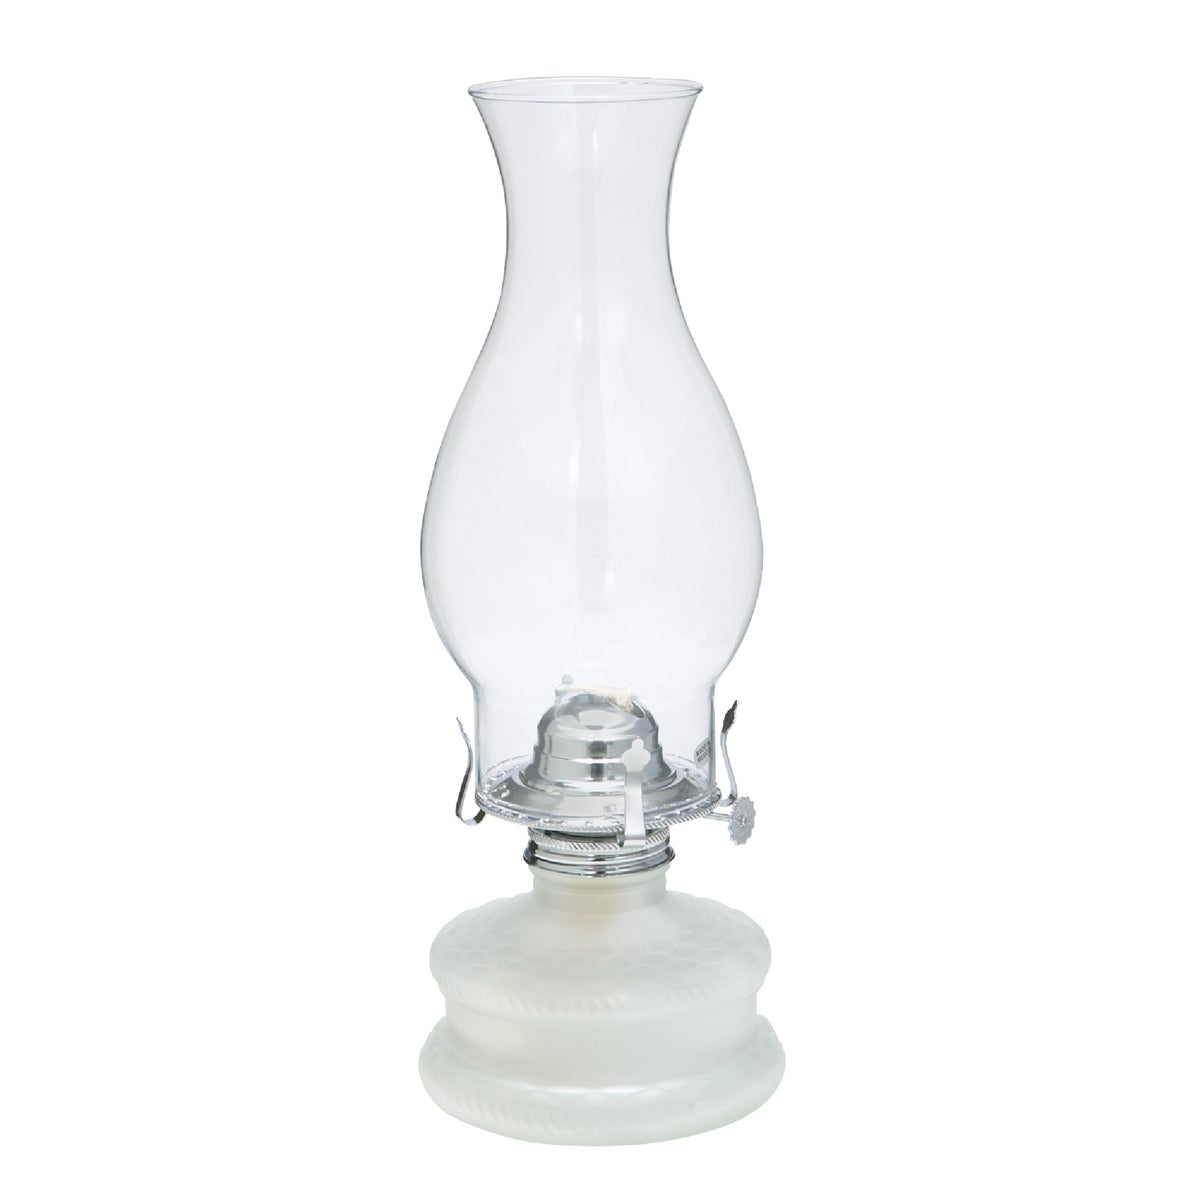 Item 662143, A vintage feel frosted glass base with brass-plated burner and flare top 